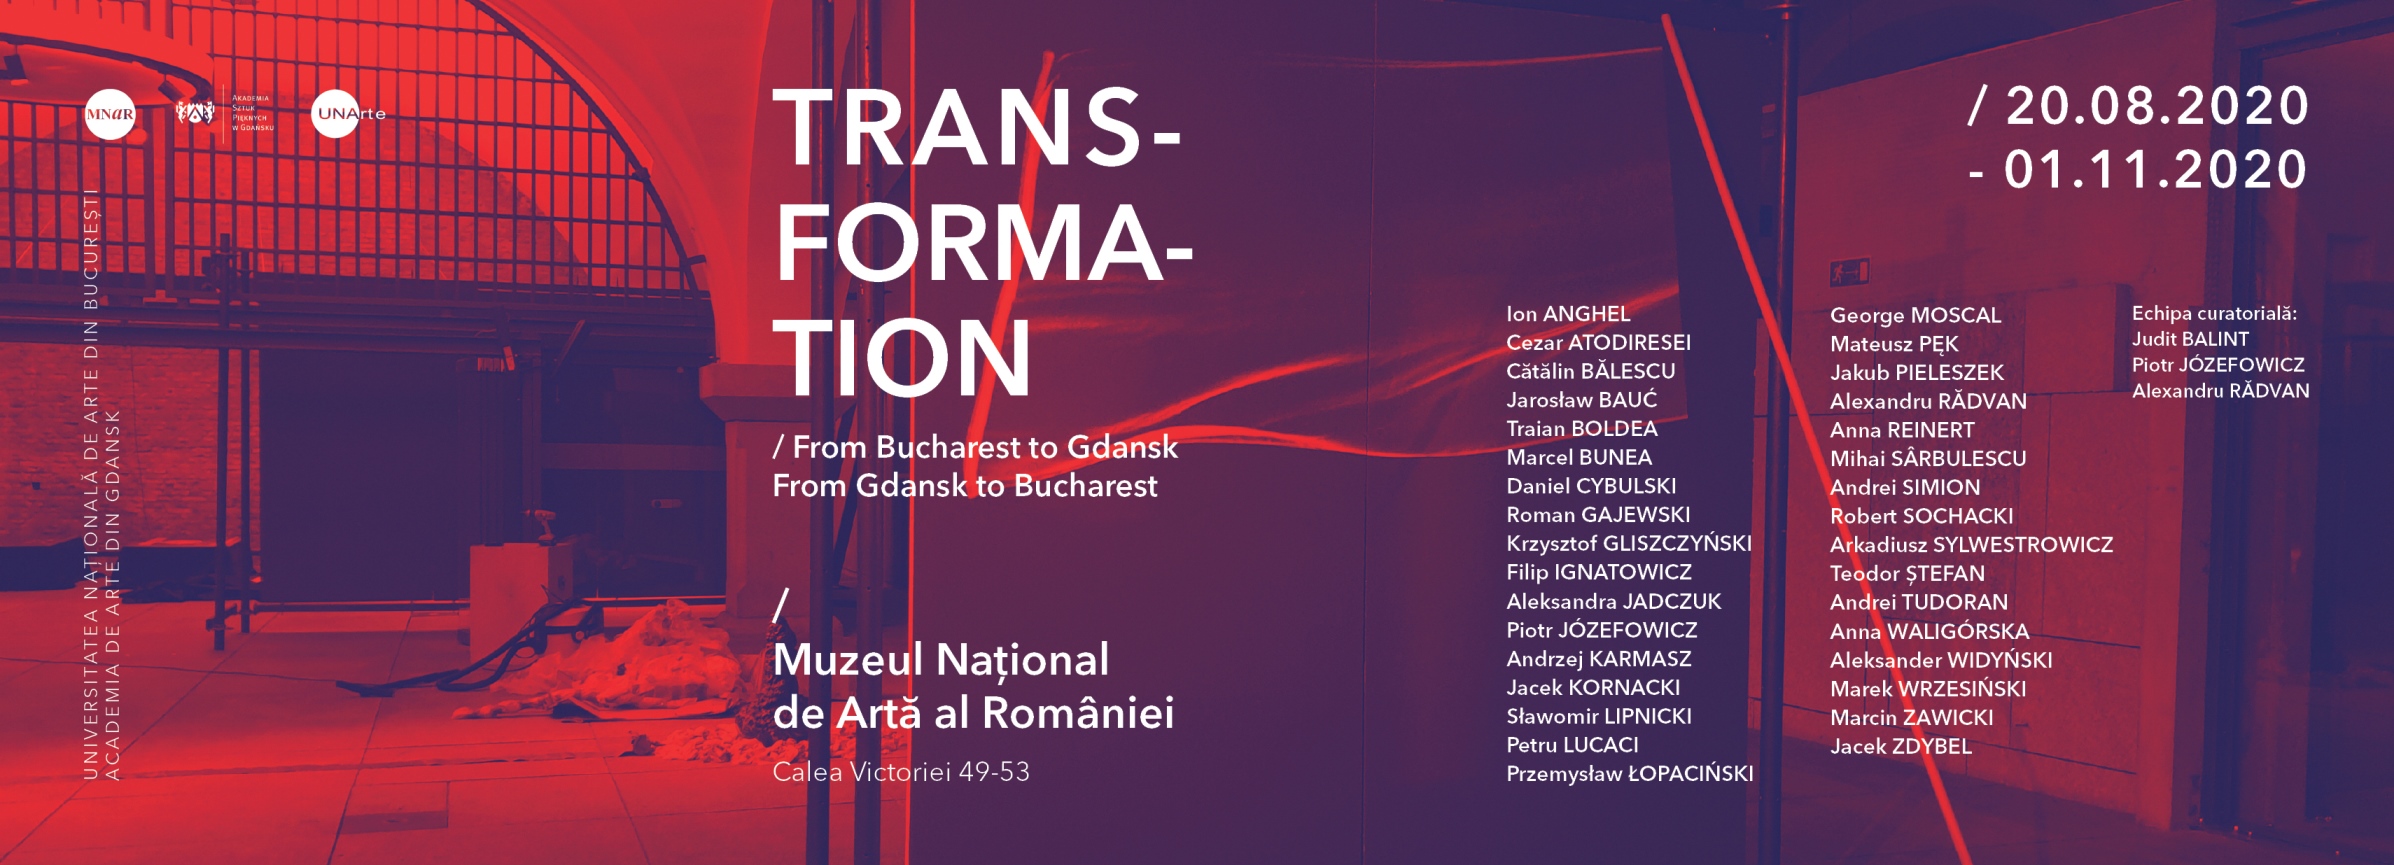 TRANSFORMATION. From Bucharest to Gdansk. From Gdansk to Bucharest